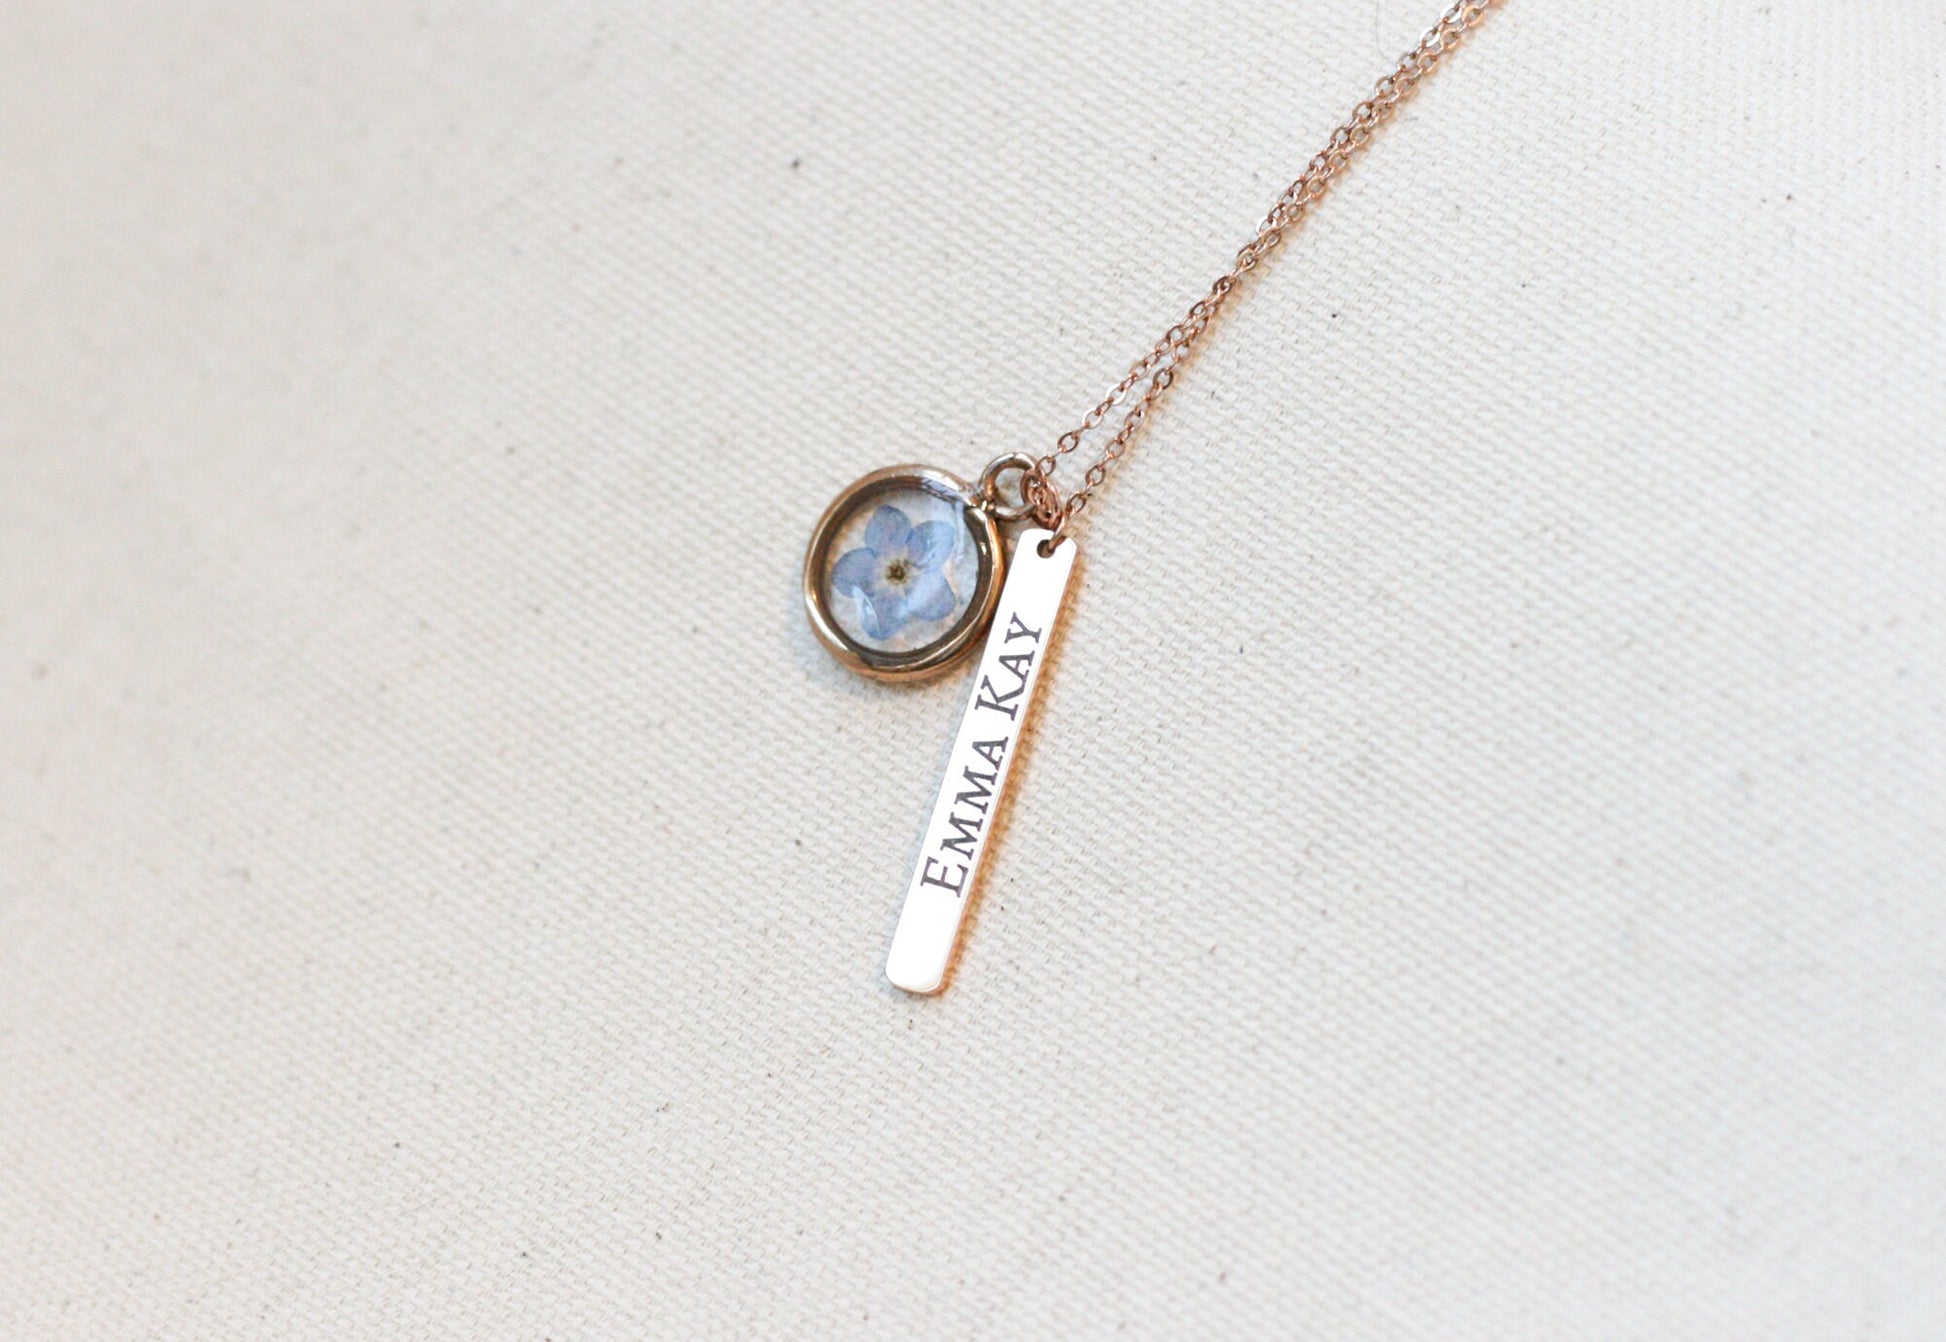 Custom miscarriage gift, personalized miscarriage gift, personalized gift, miscarry rose gold necklace, miscarriage necklace